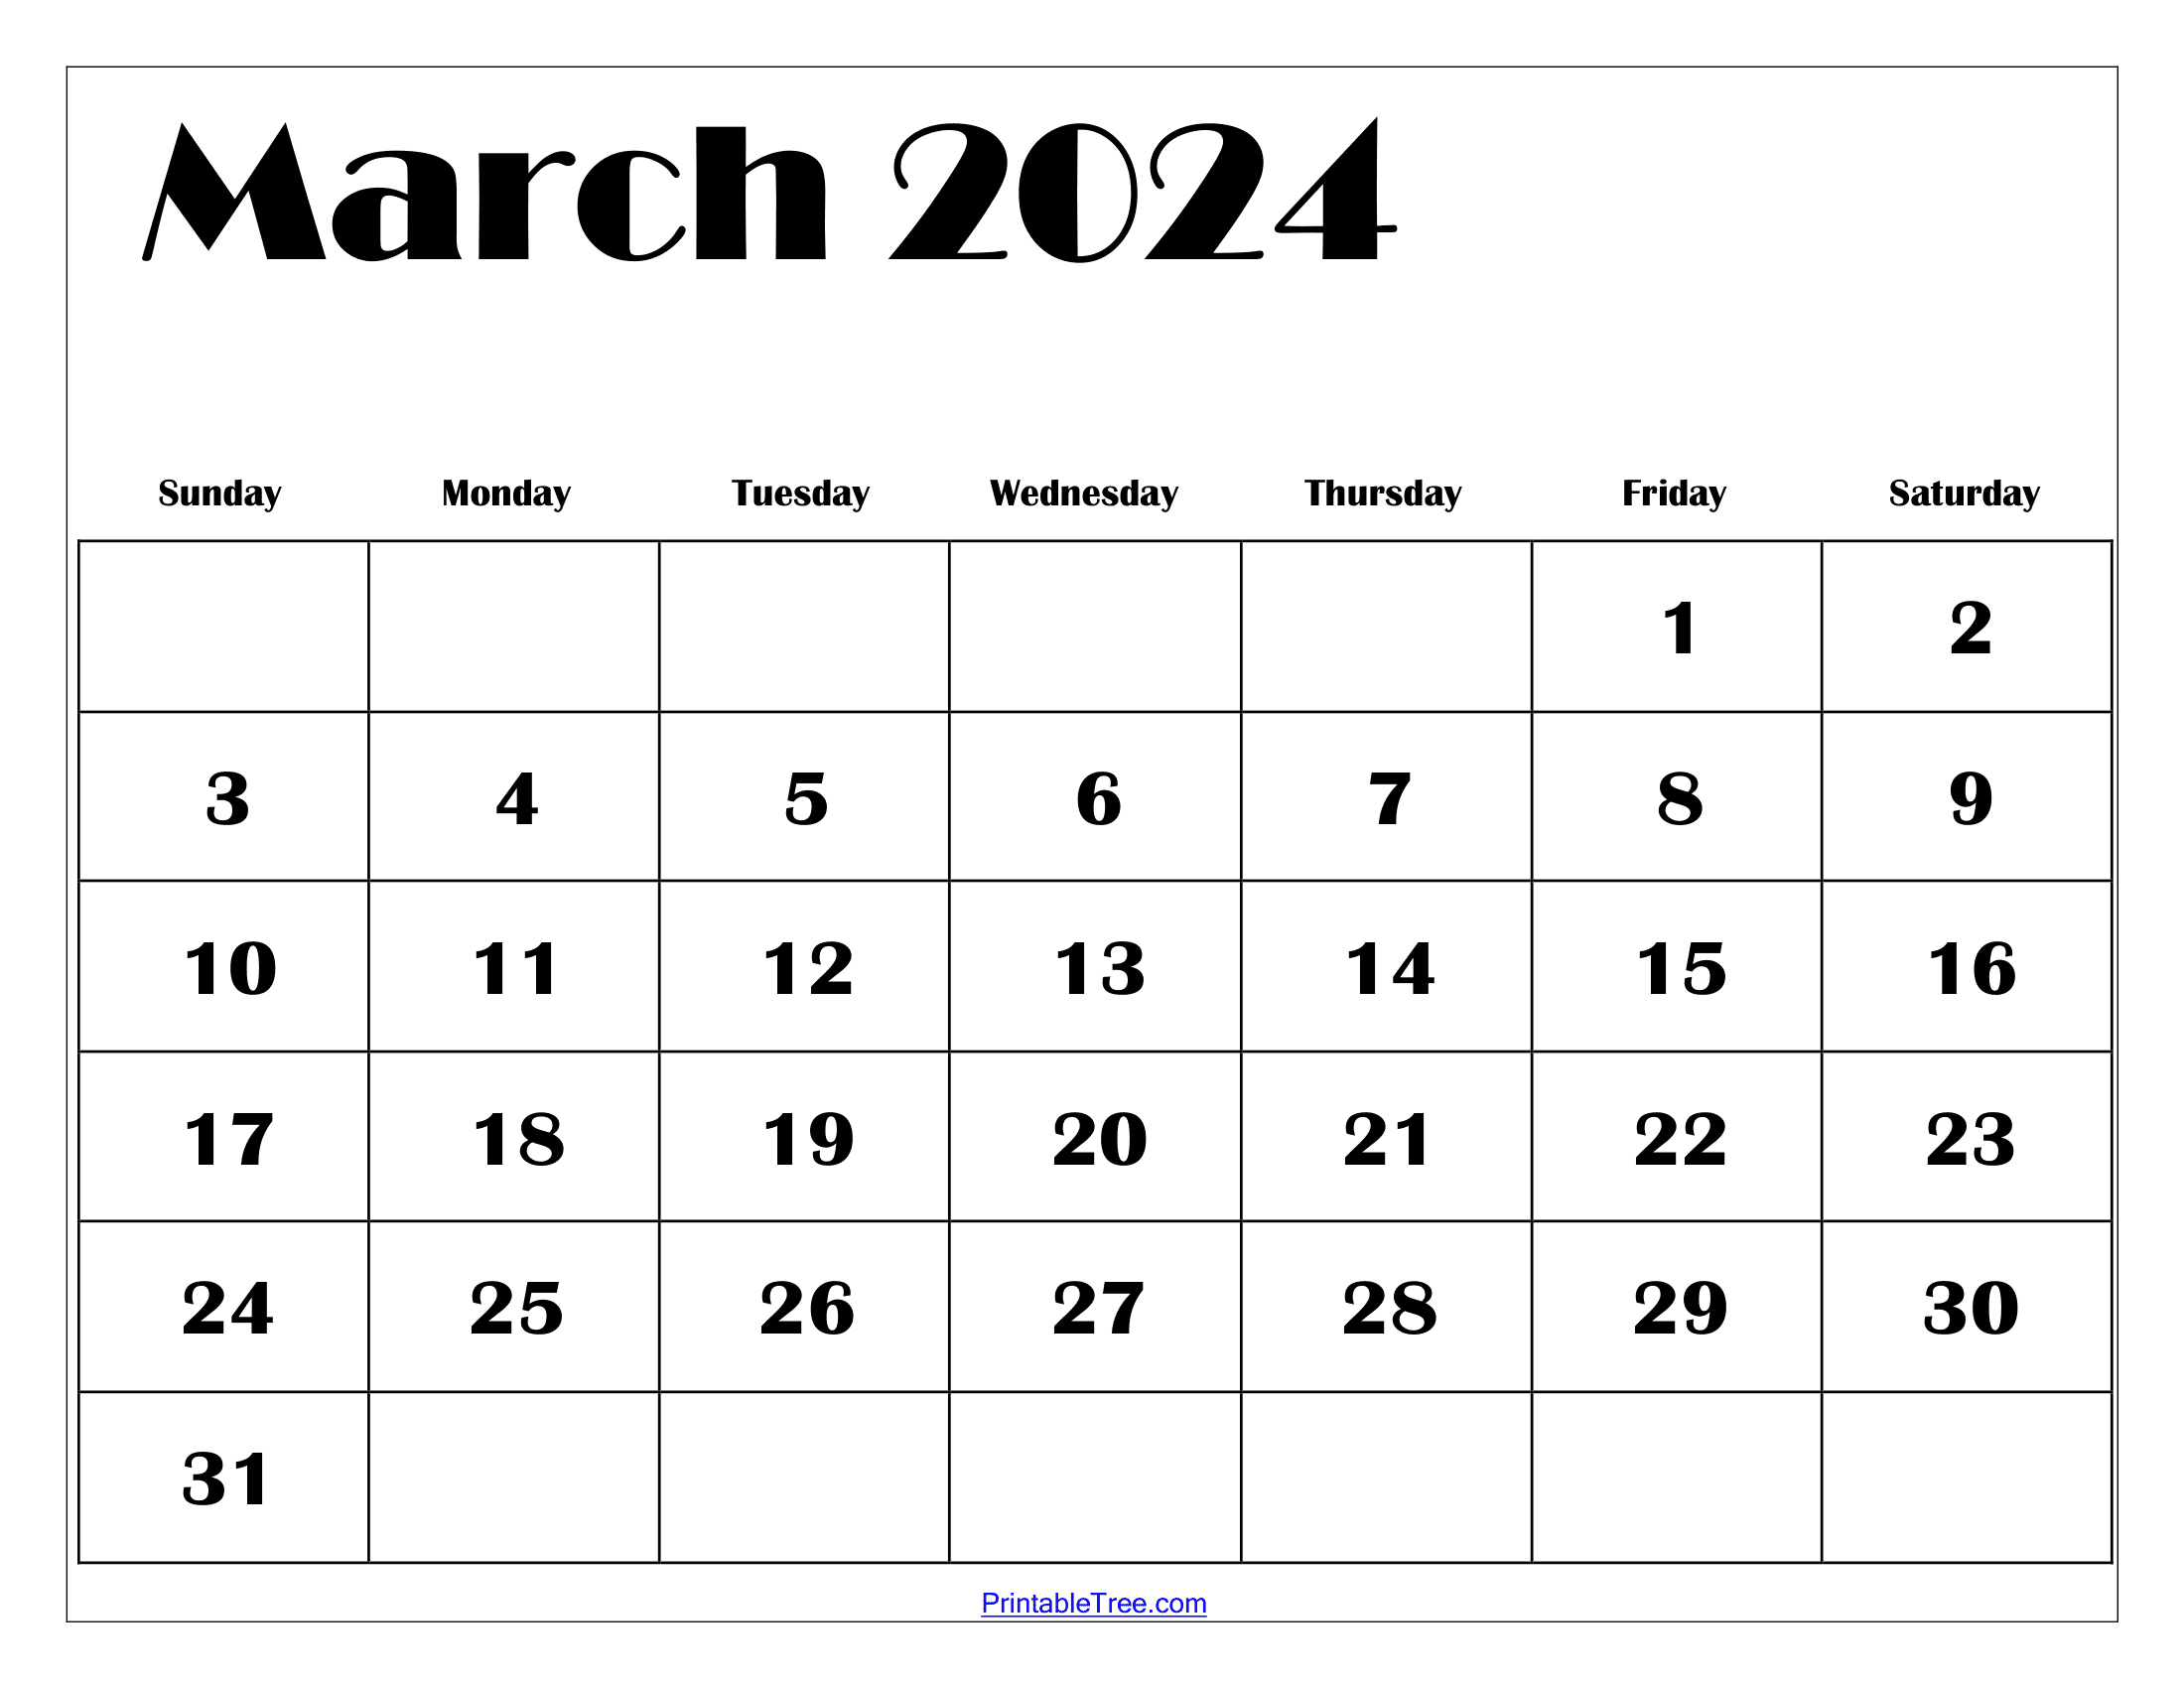 March 2024 Calendar Printable Pdf With Holidays Template Free | Free Printable Calendar 2024 March